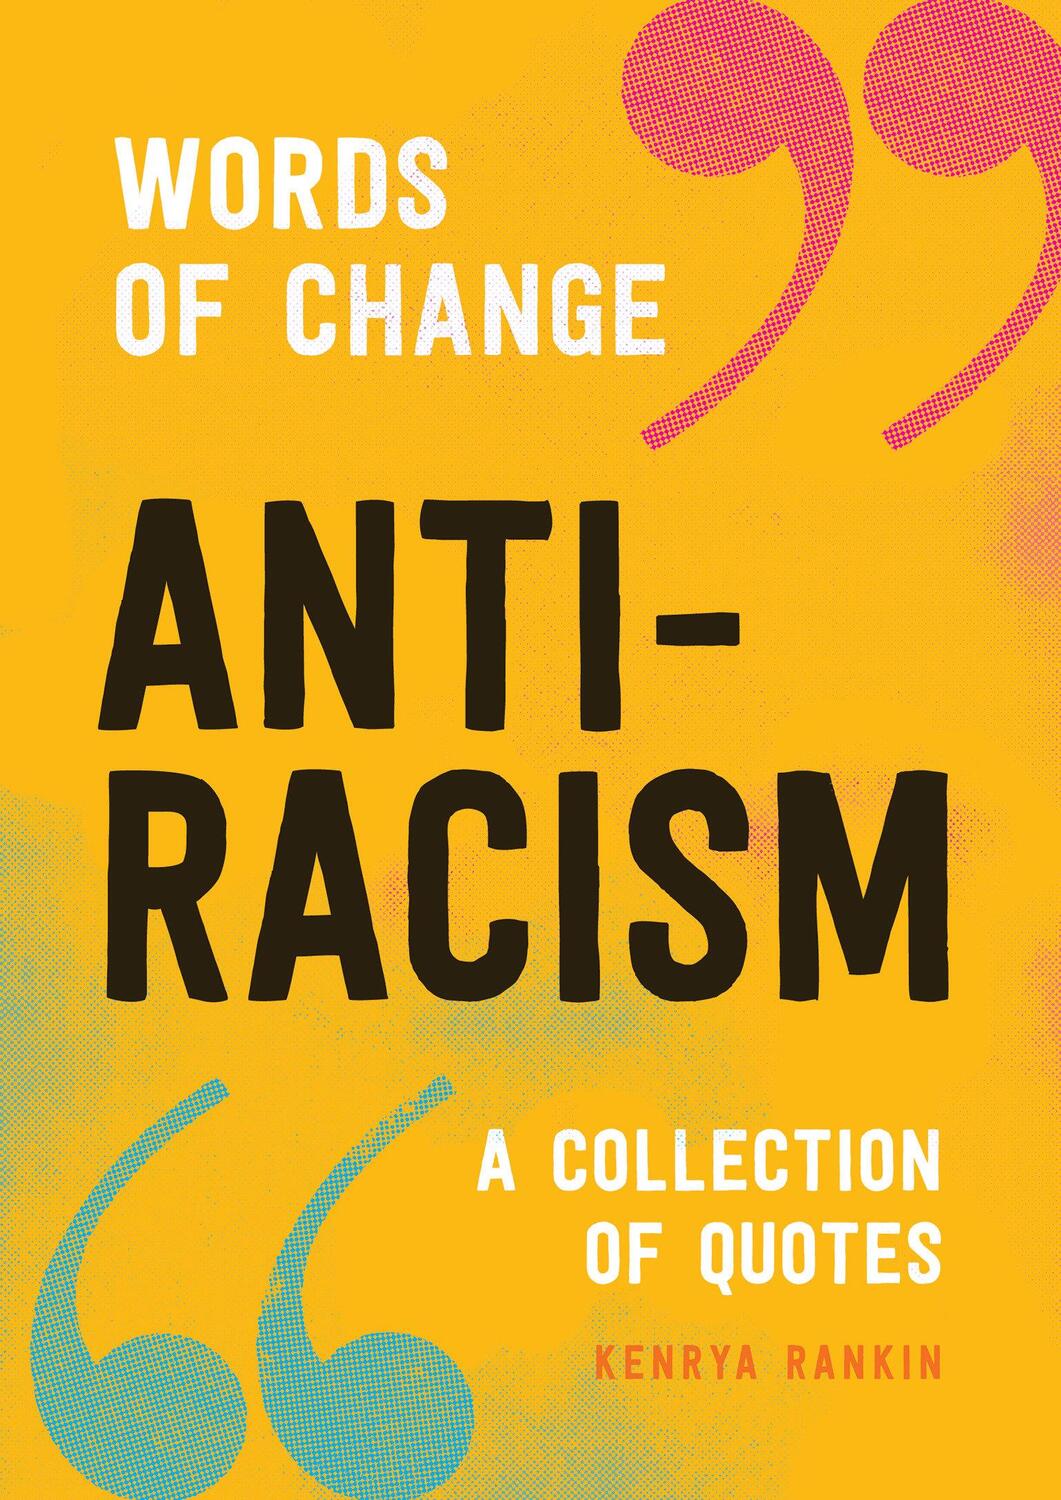 Cover: 9781632173409 | Anti-Racism (Words of Change Series): Powerful Voices, Inspiring Ideas